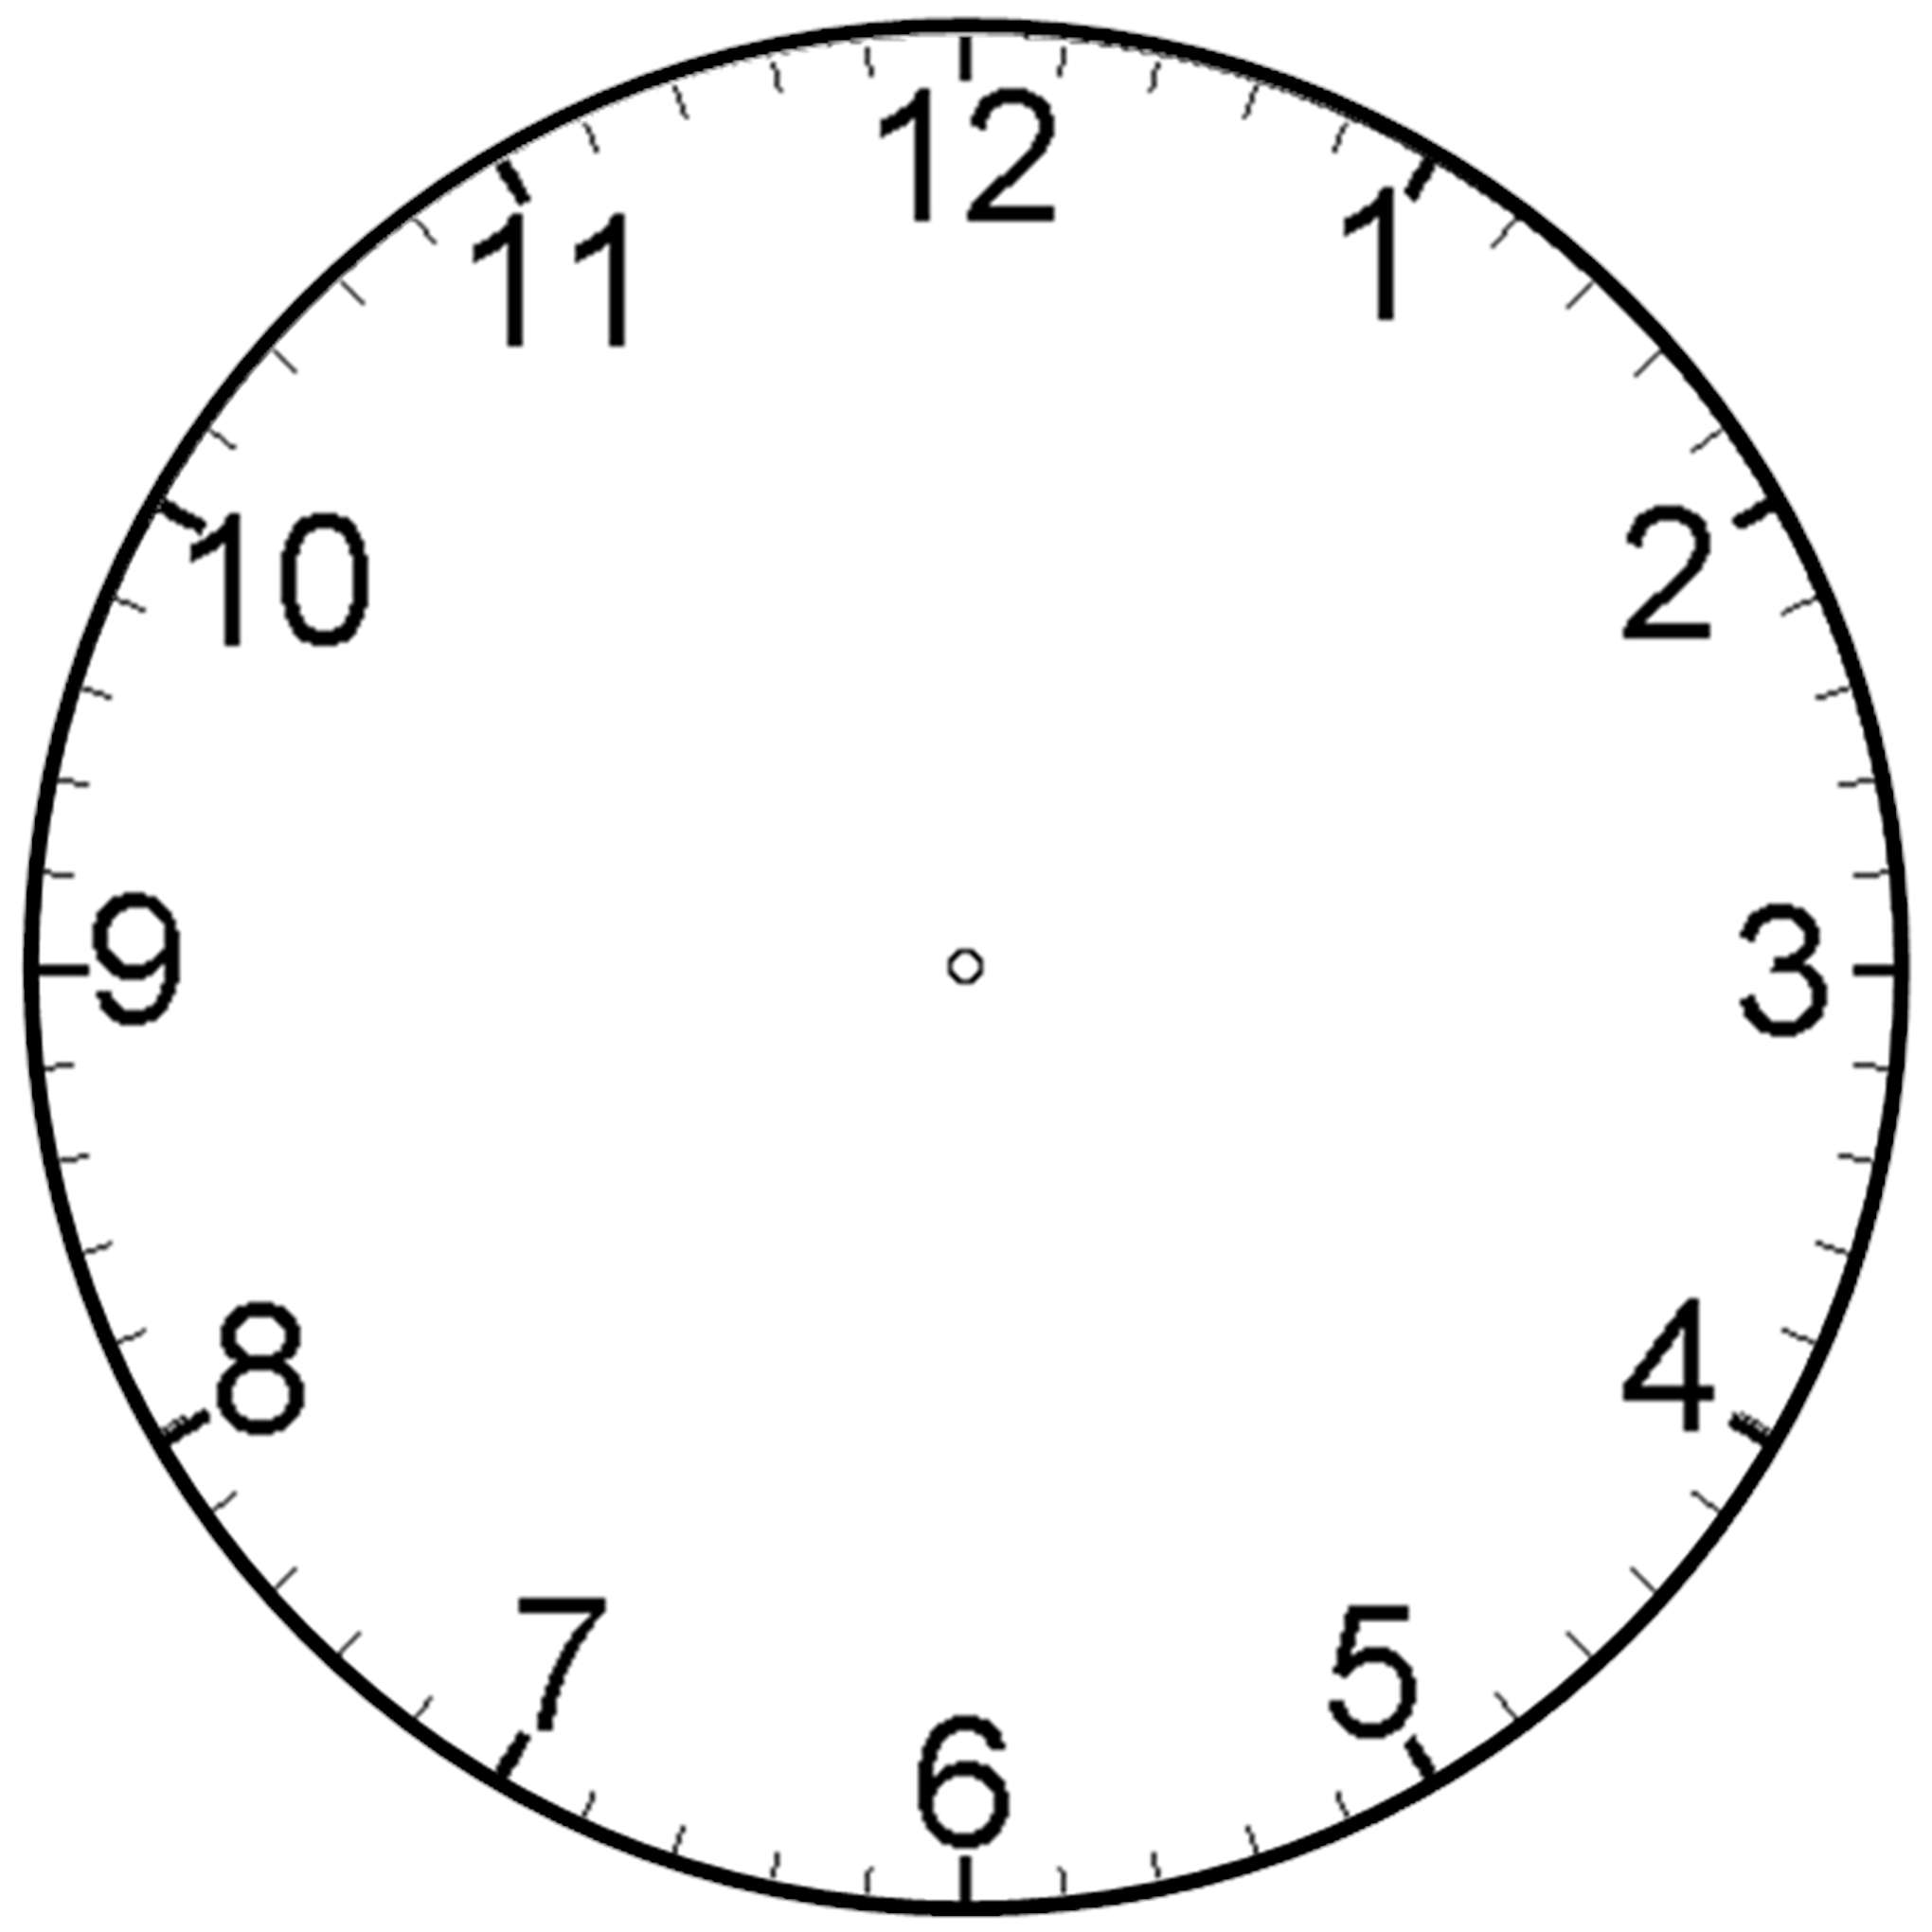 Blank Clock Faces Template - Clipart library